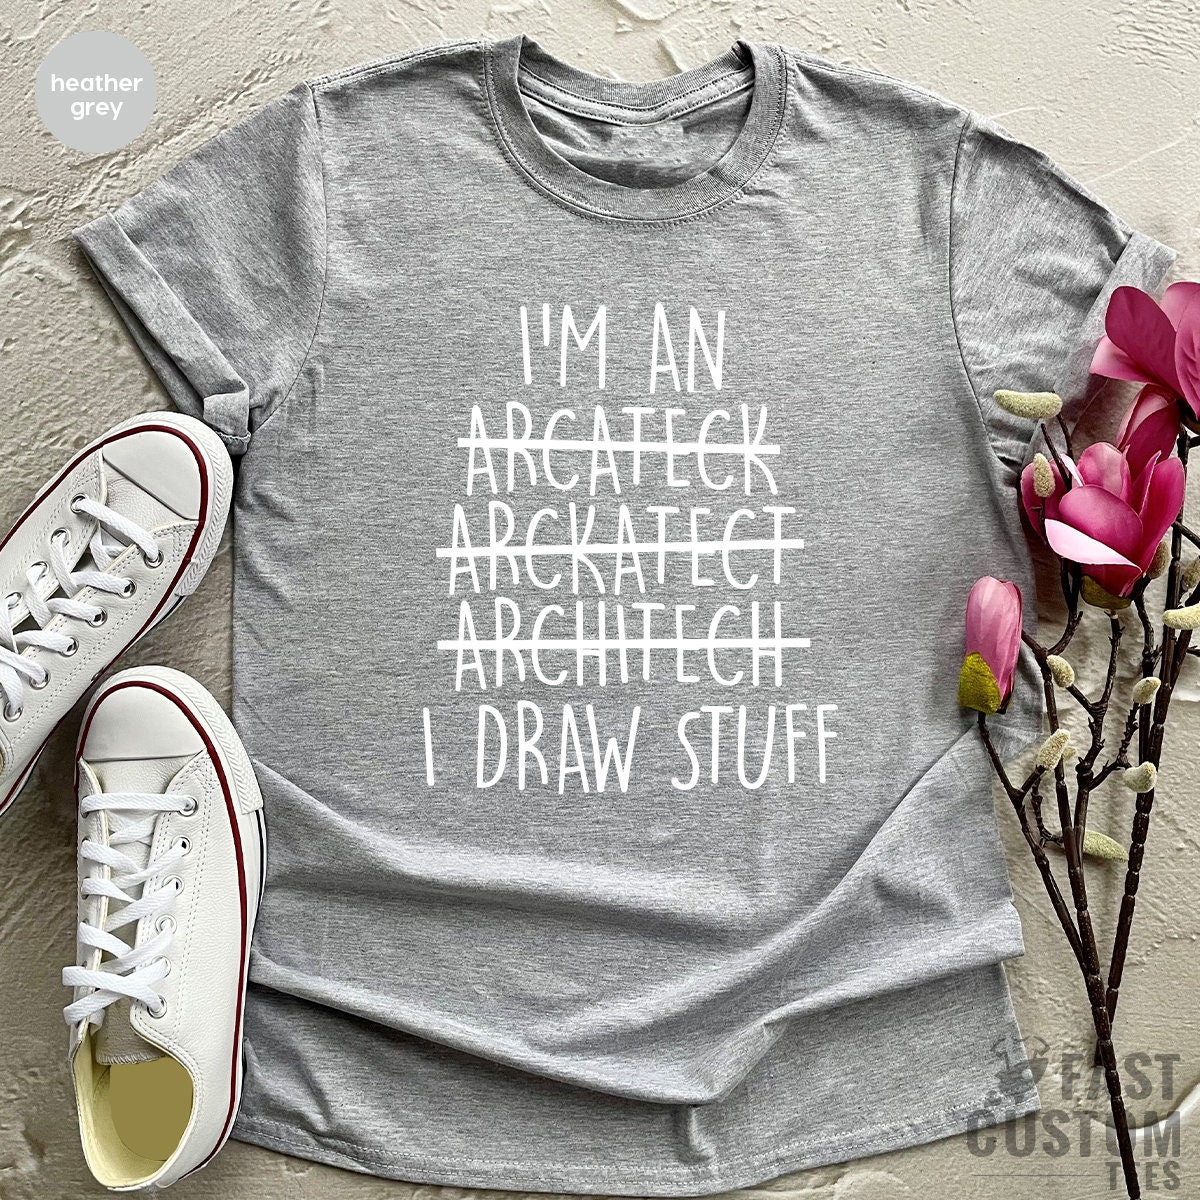 Funny Architect Shirt, Architect TShirt, Architect Student Tee, Proffesion T Shirt, Gift For Architect, Architecture Shirt, Future Architect - Fastdeliverytees.com